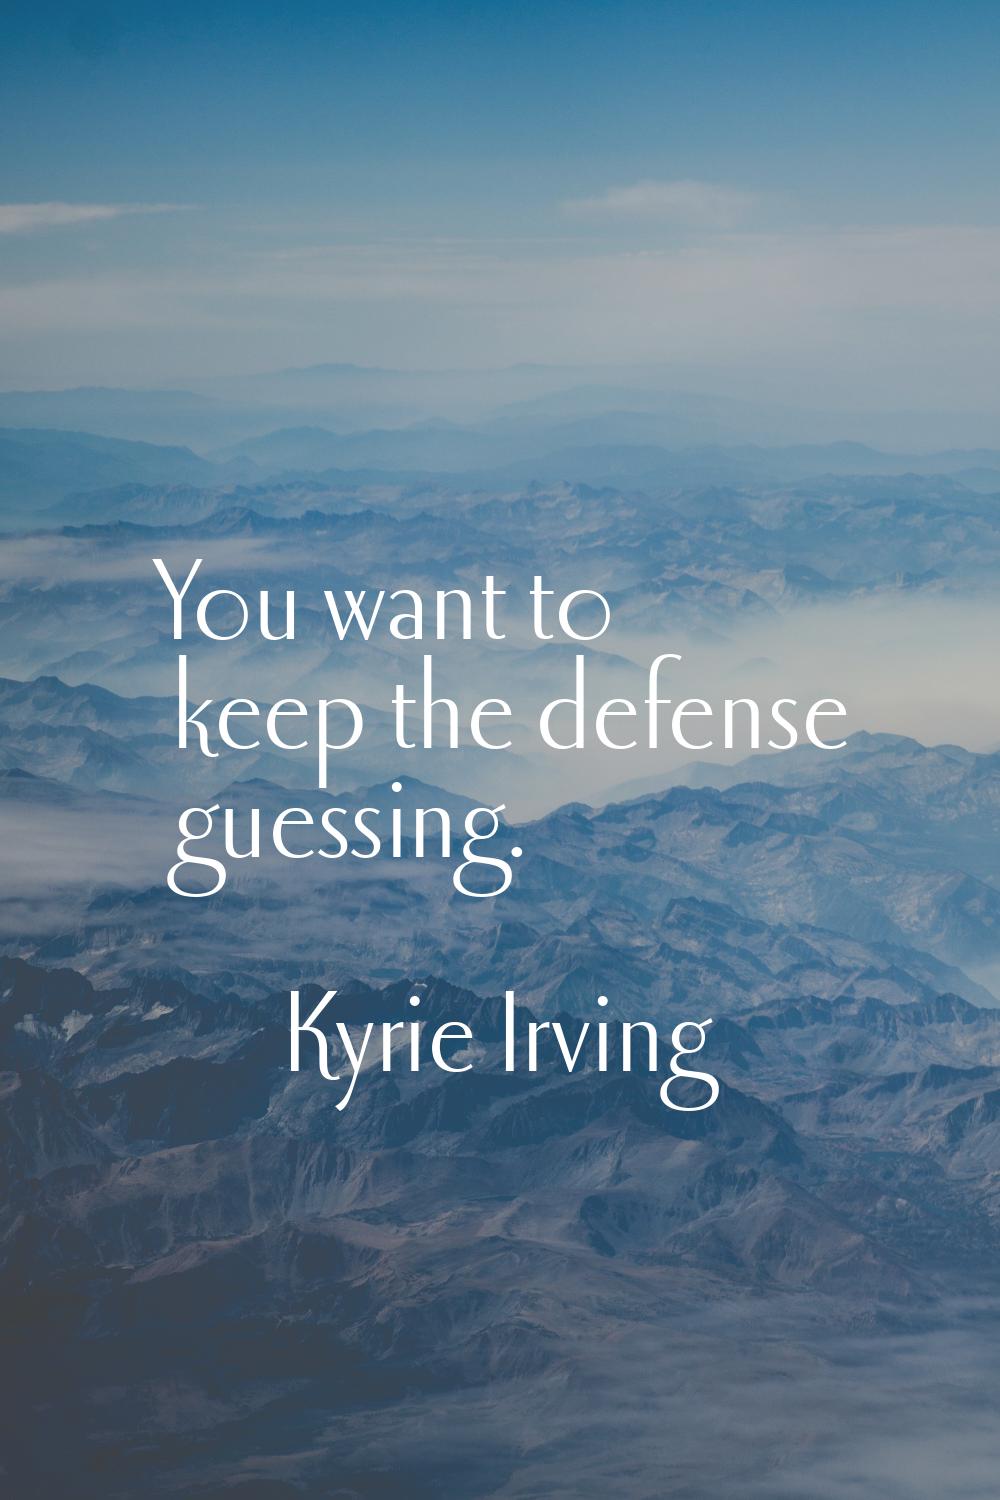 You want to keep the defense guessing.